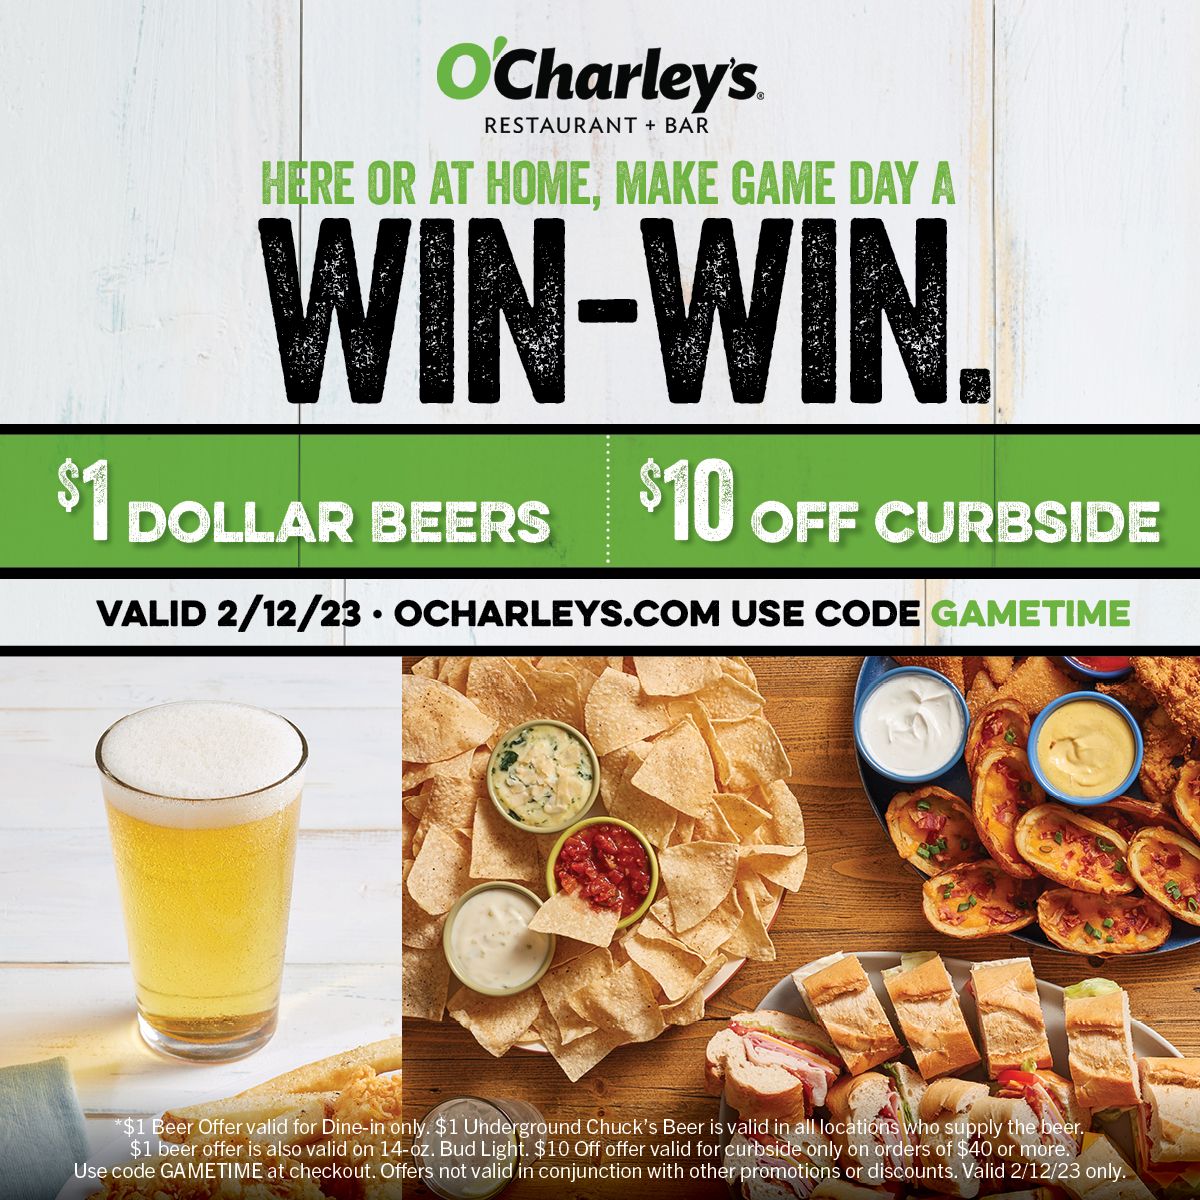 O'Charley's Celebrating Valentine's Day and Super Bowl with Delicious Meals and Deals